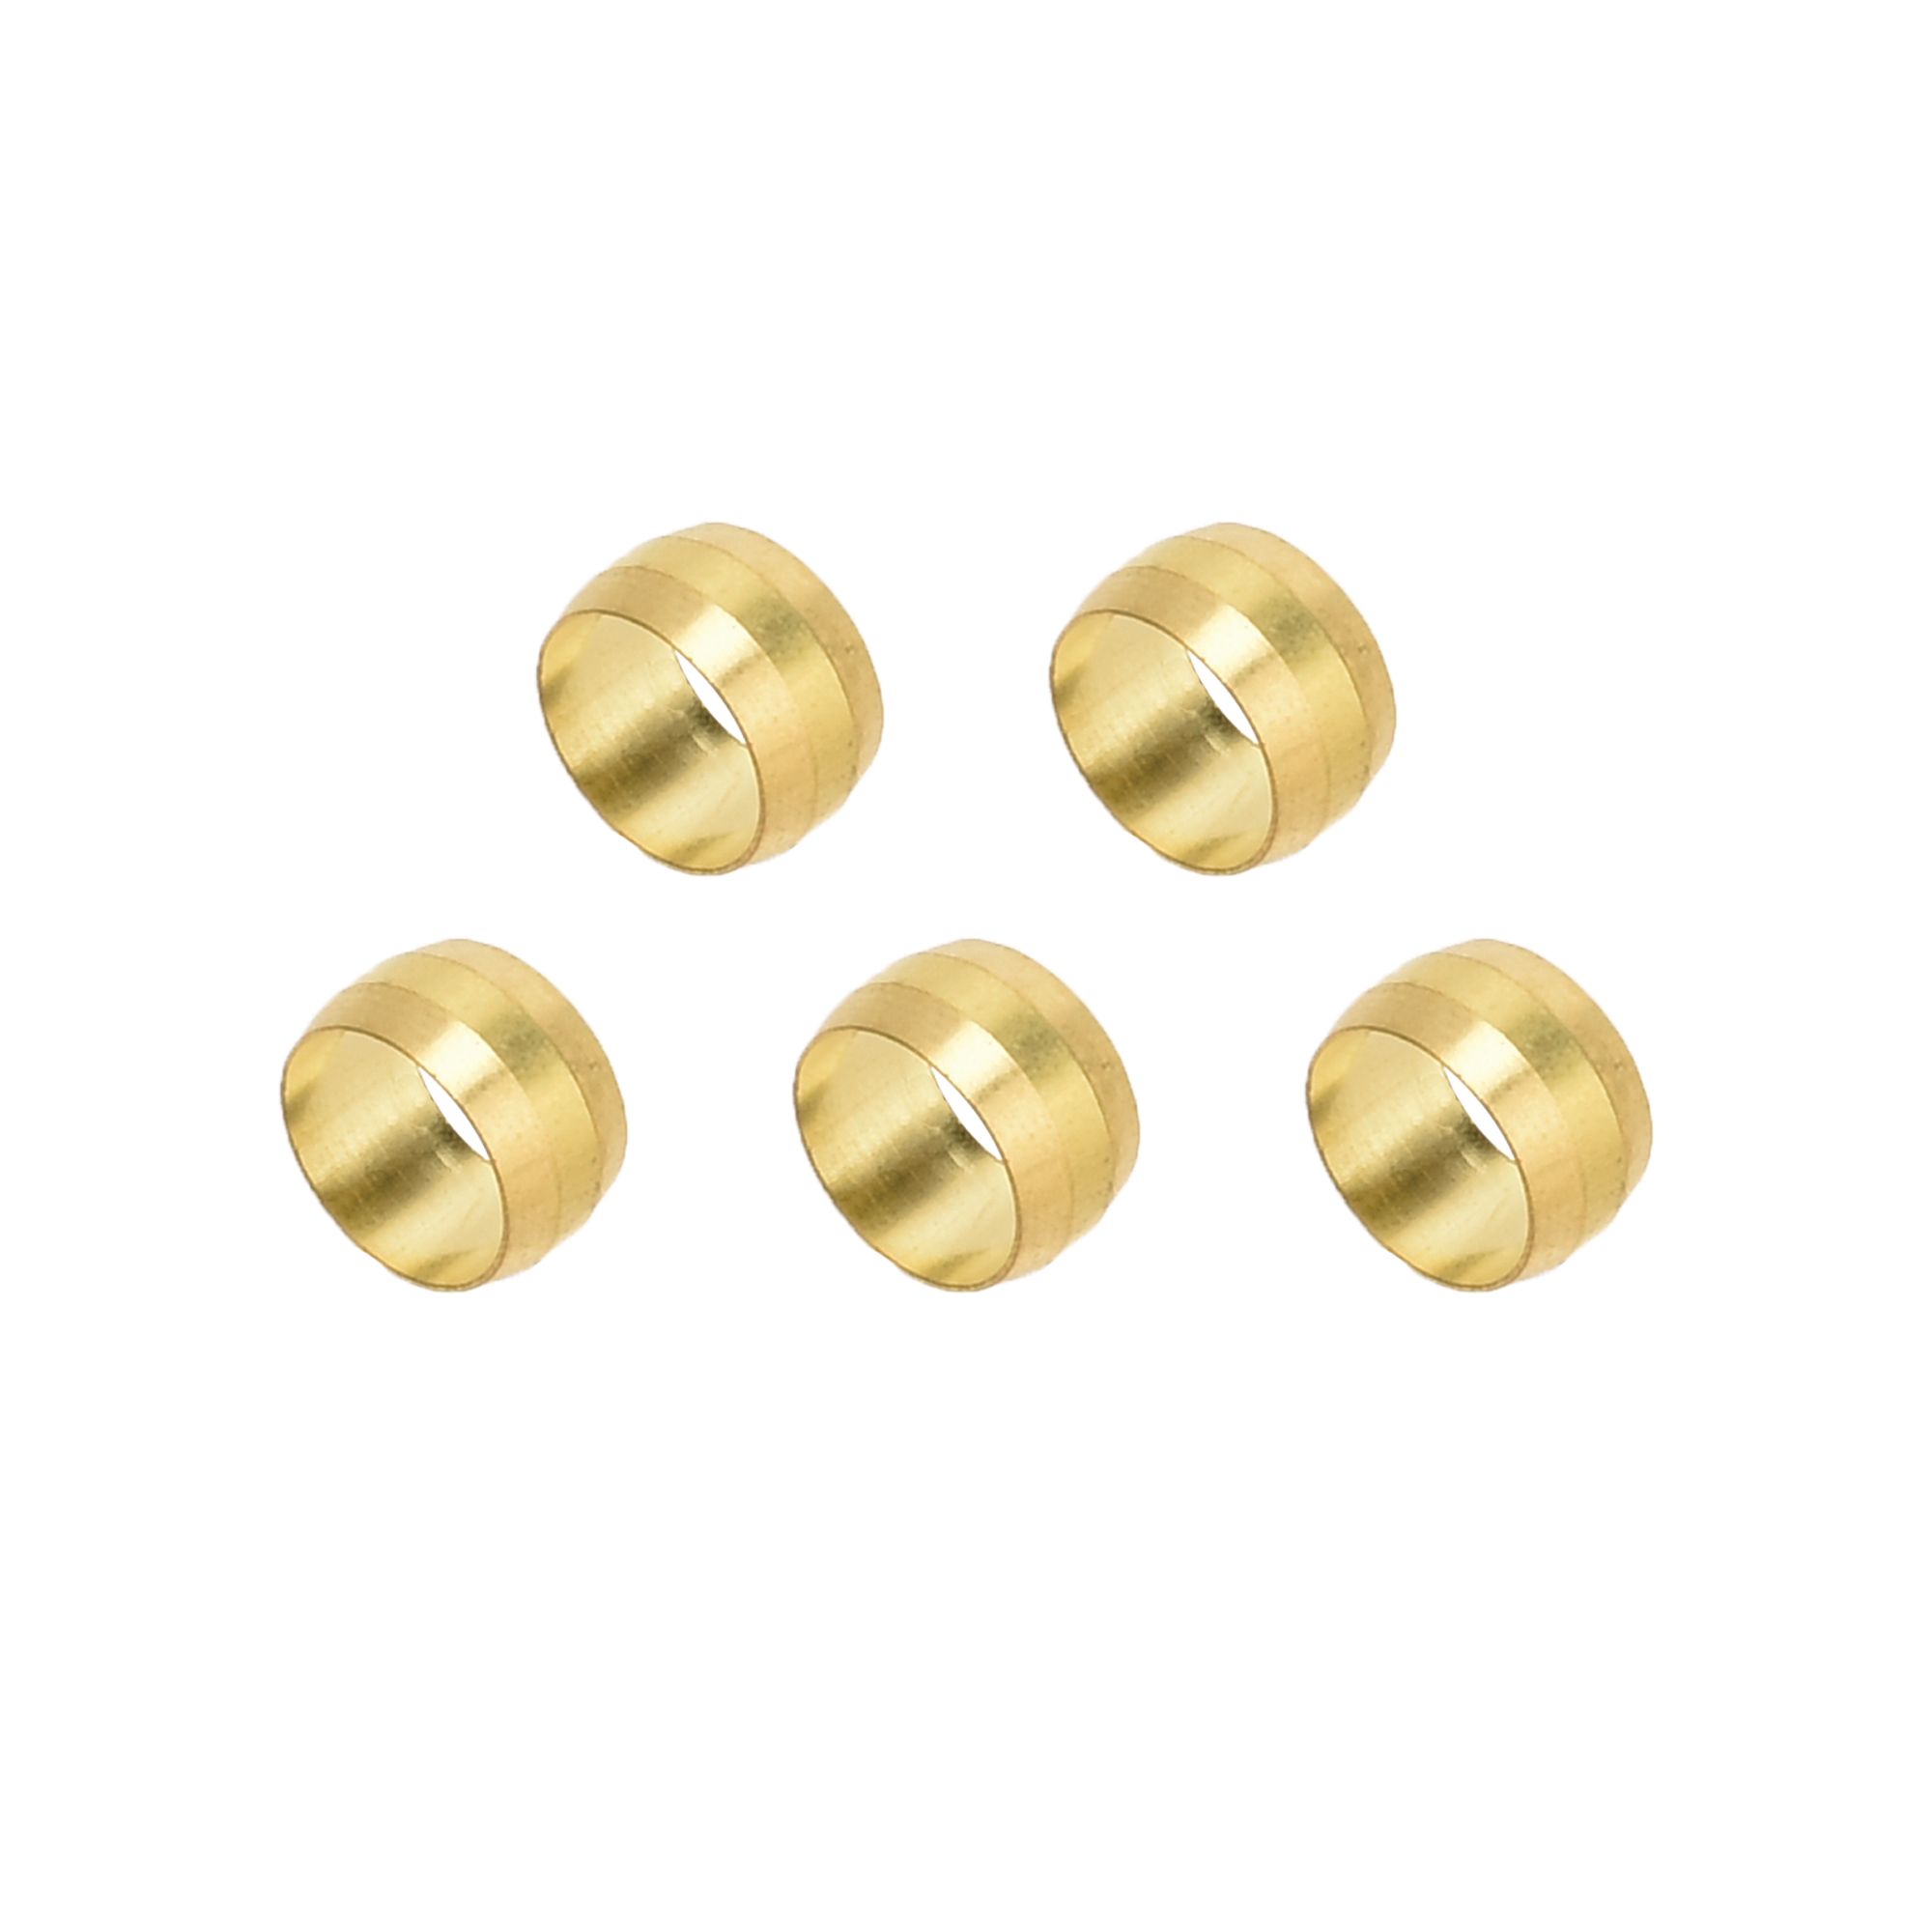 https://media.diy.com/is/image/Kingfisher/flomasta-brass-compression-olive-dia-10mm-pack-of-5~5059340072180_01c?$MOB_PREV$&$width=768&$height=768